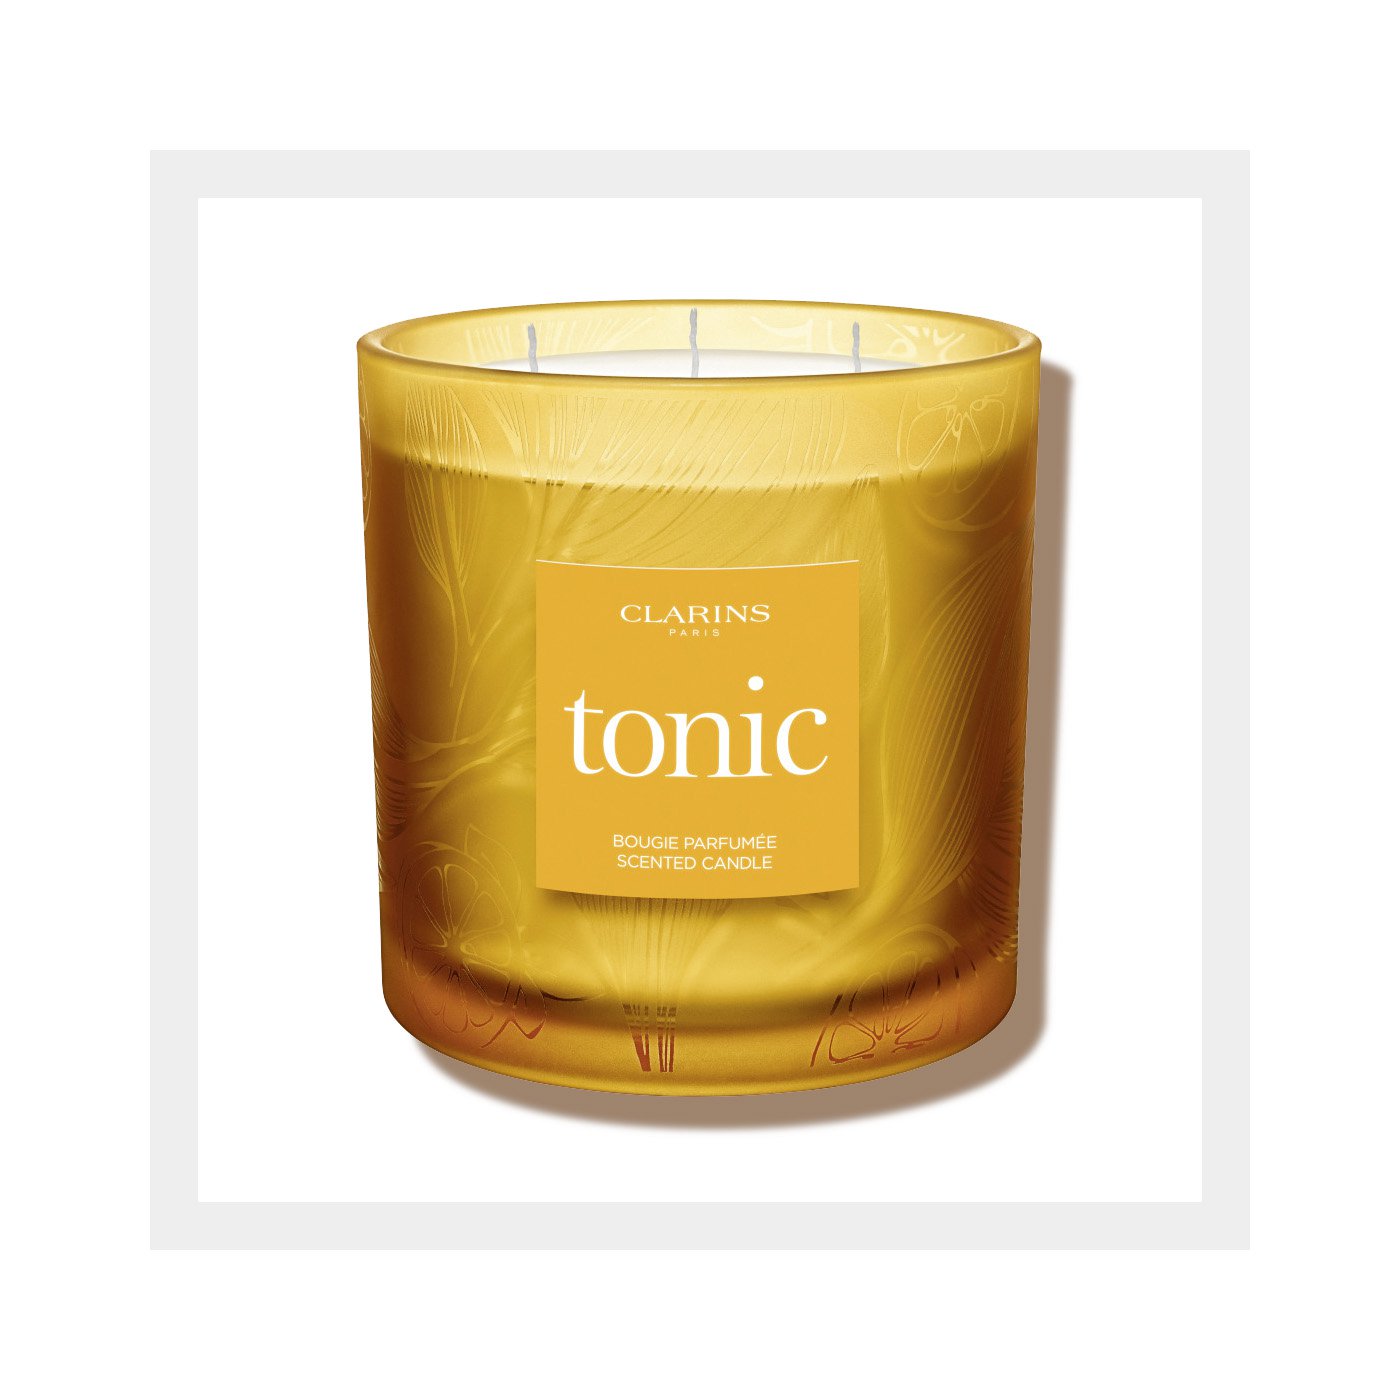 Tonic Scented Candle, For the Home - Clarins